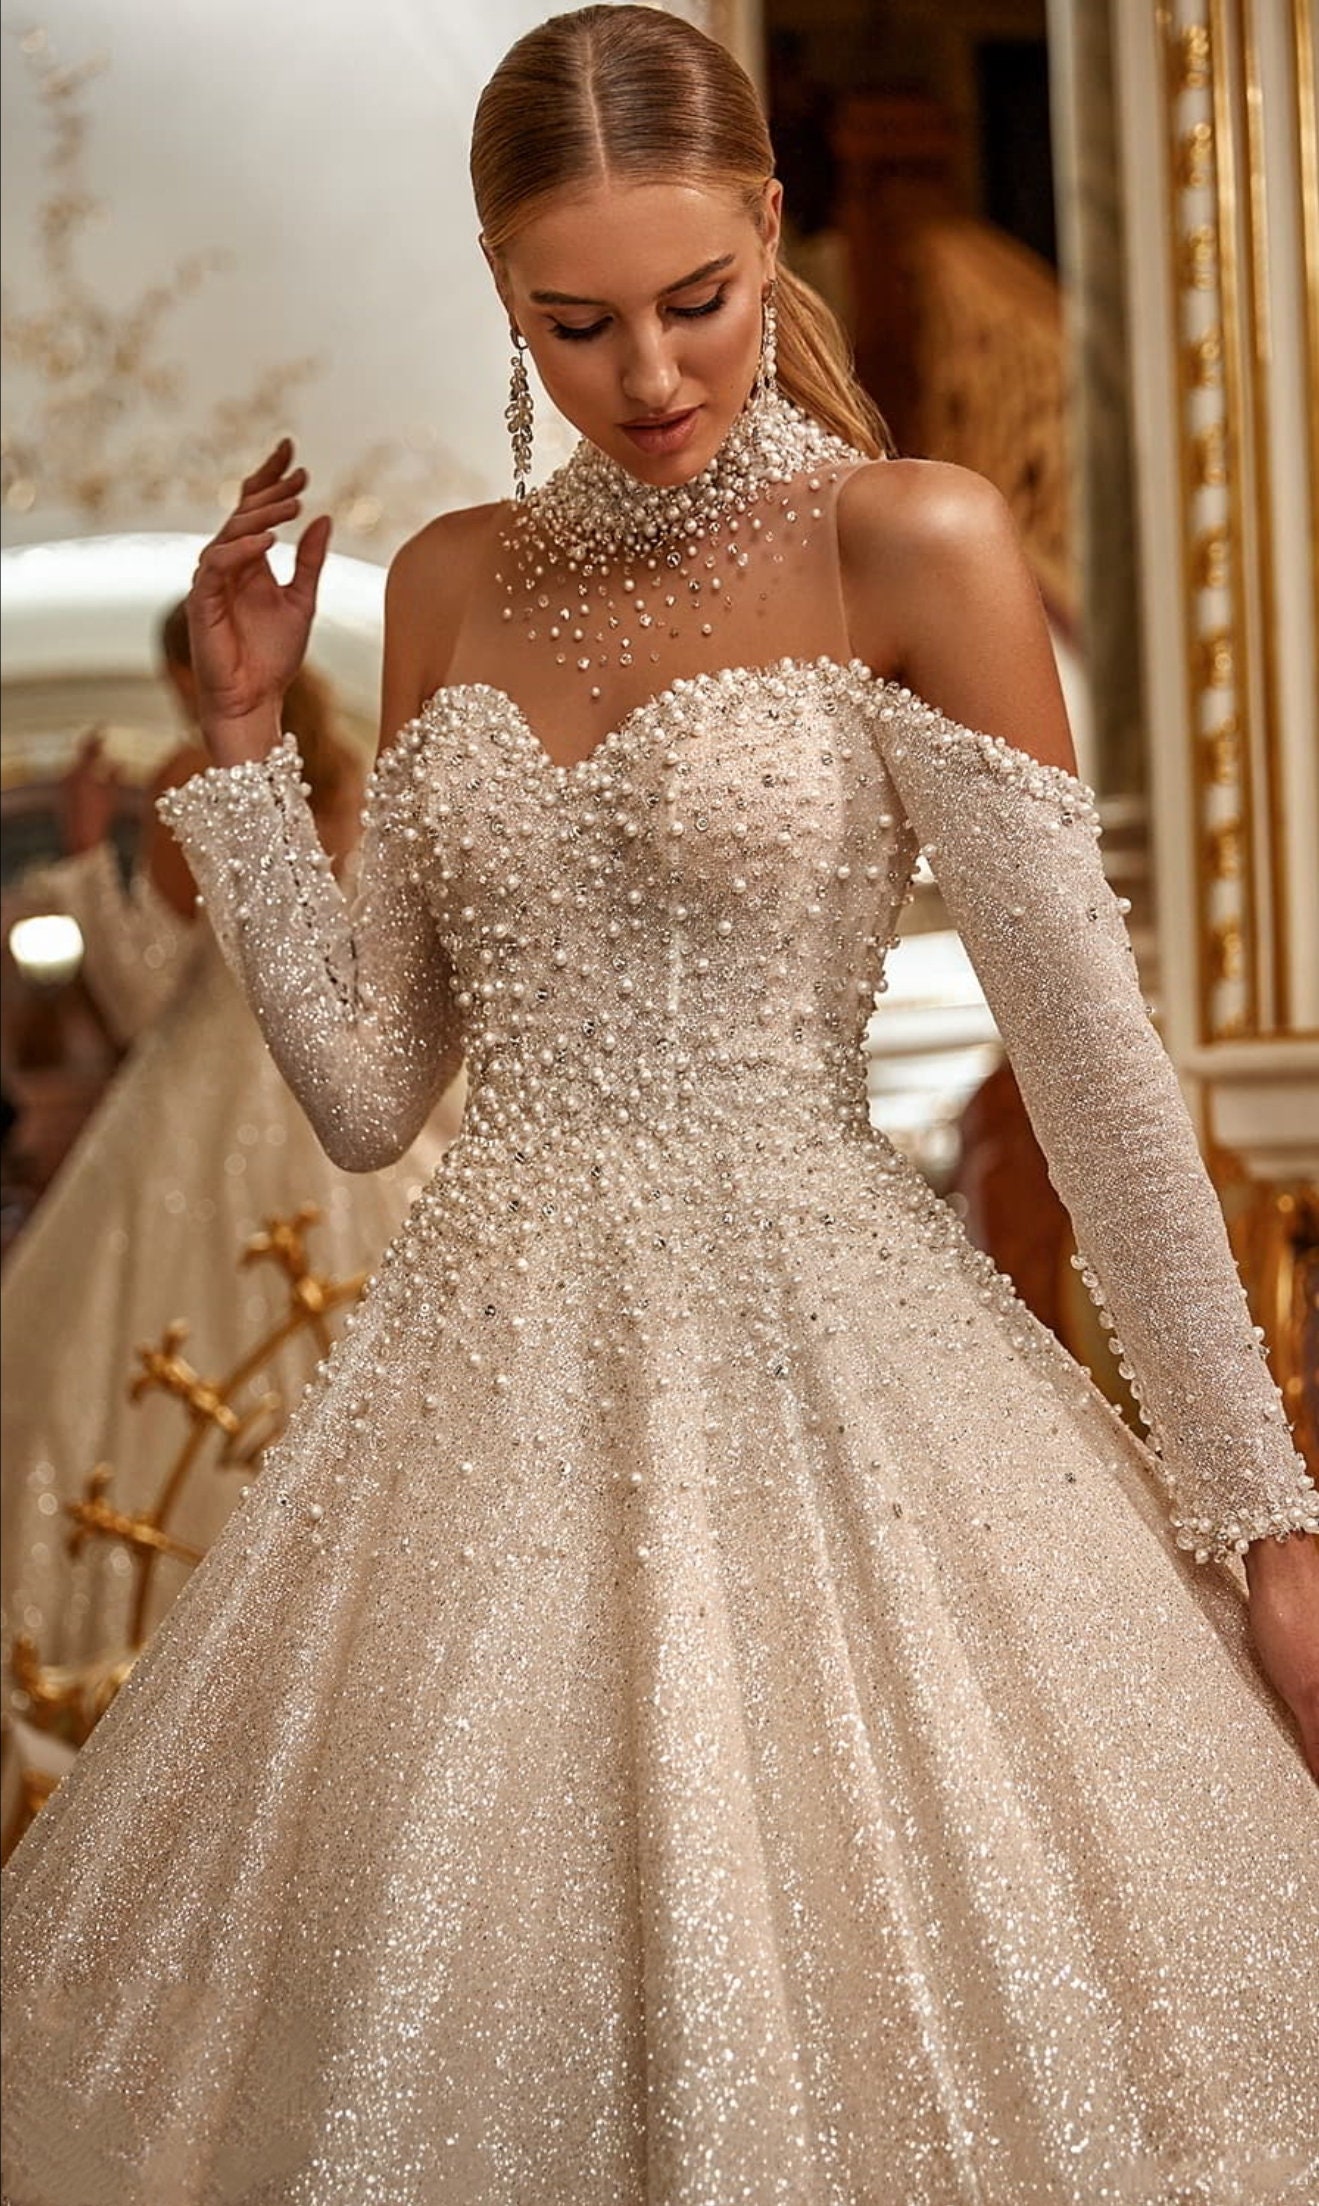 Wedding dress D2438 Product for Sale at NY City Bride